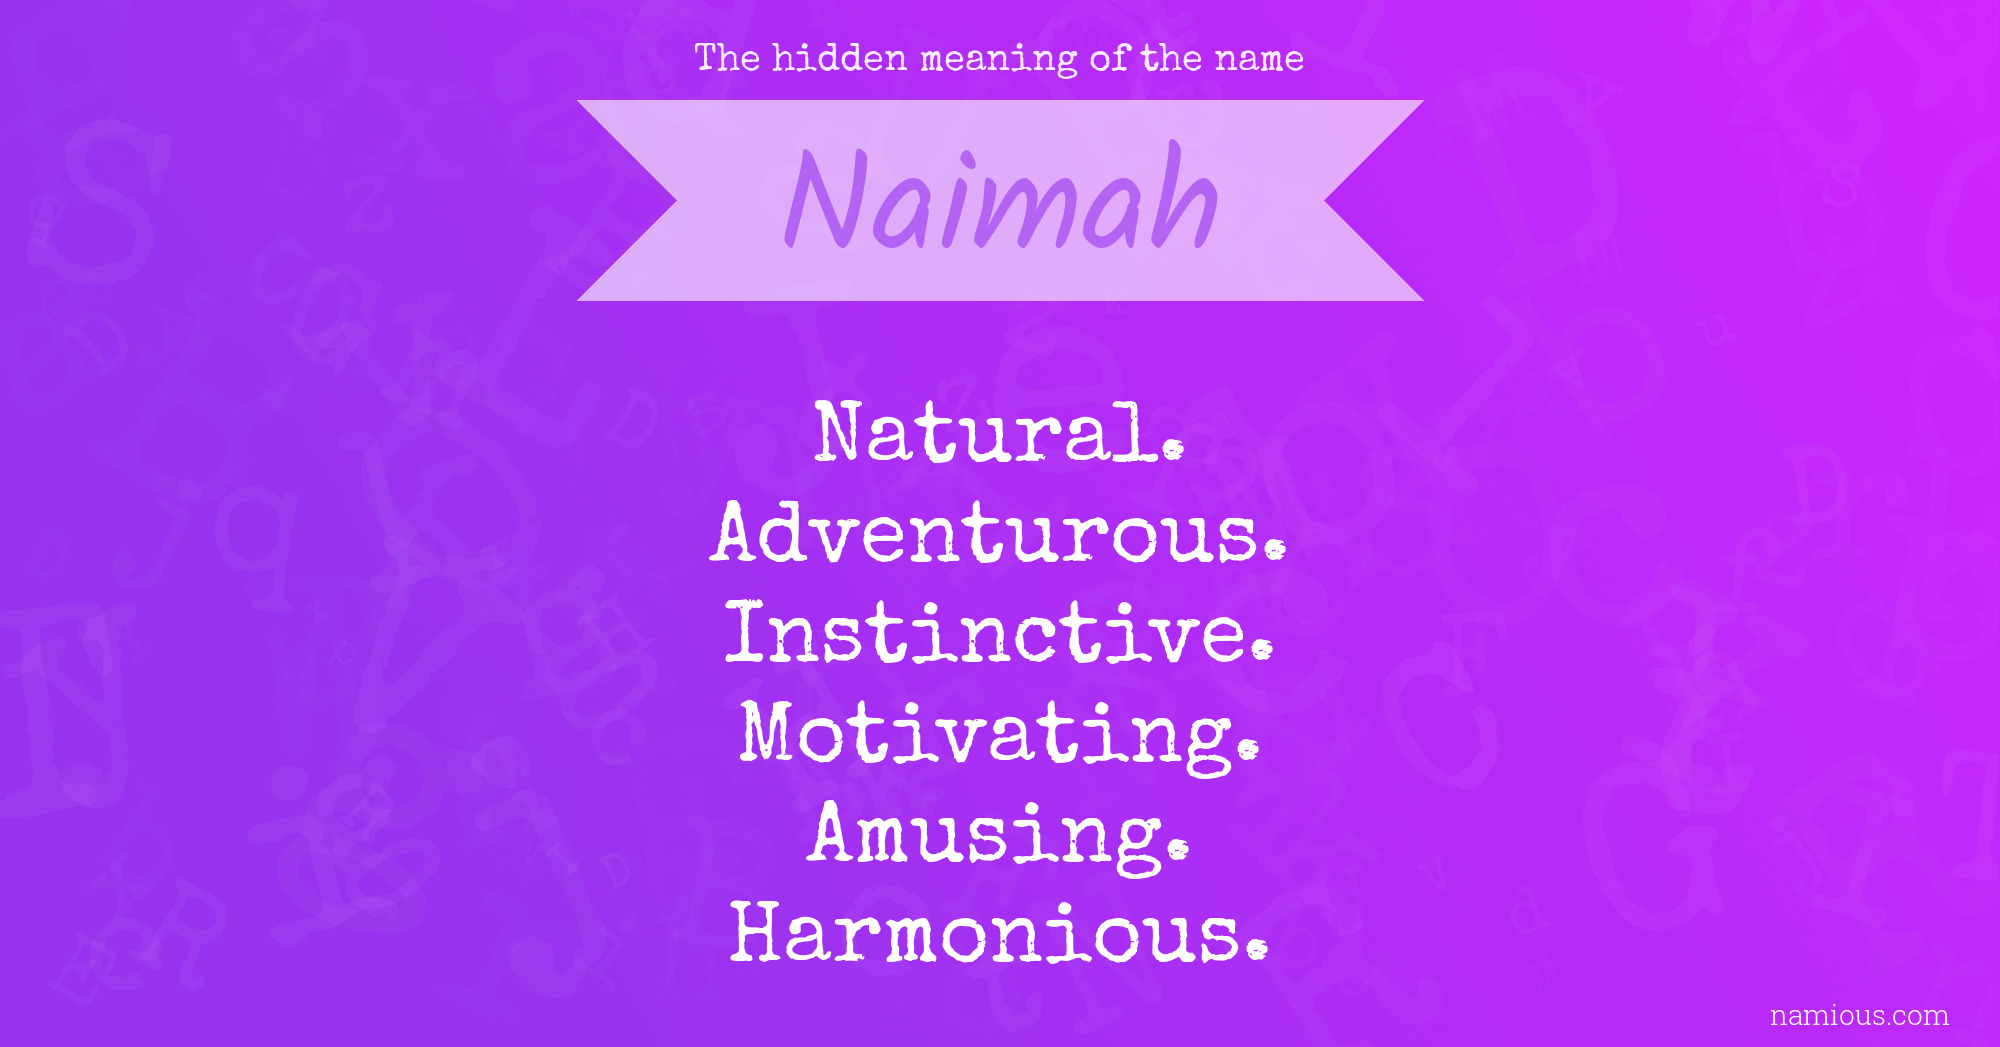 The hidden meaning of the name Naimah